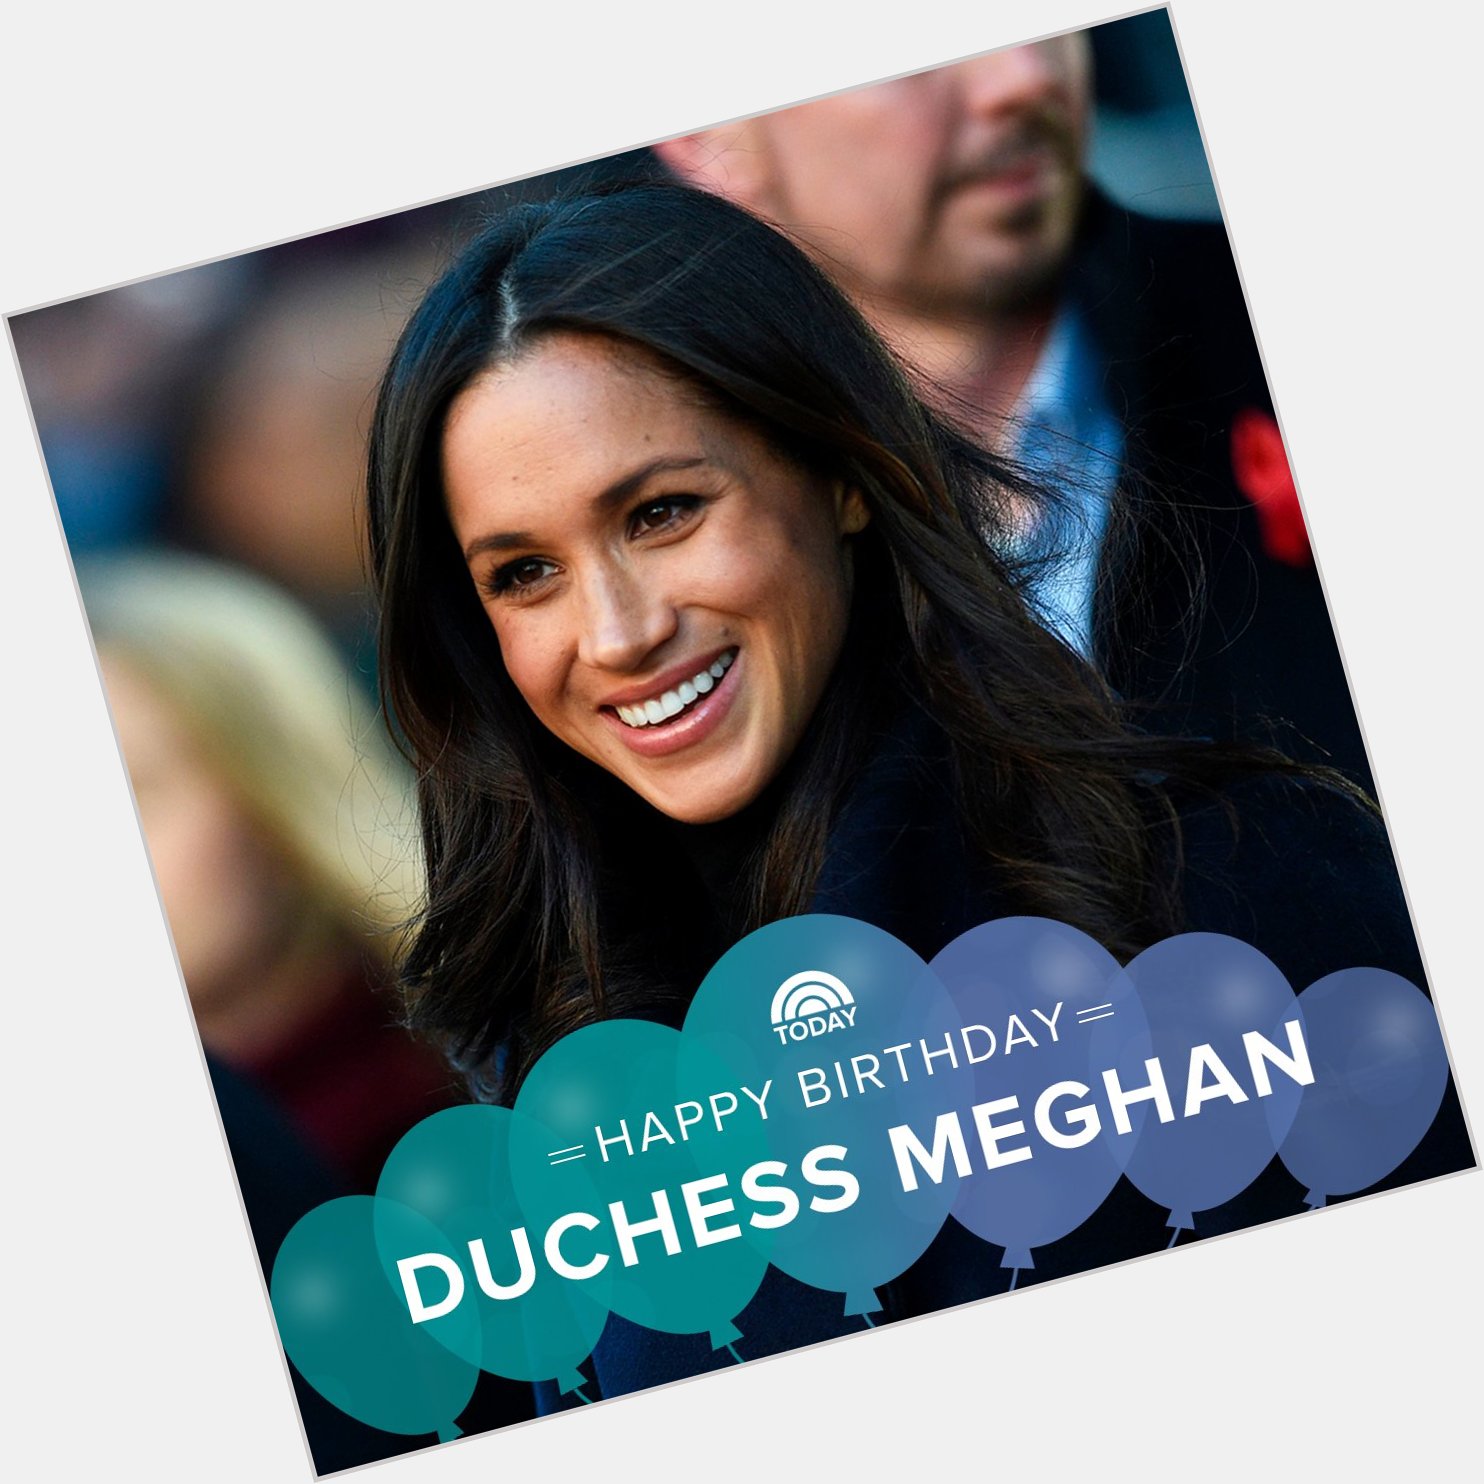 Happy birthday to the Duchess of Sussex!  